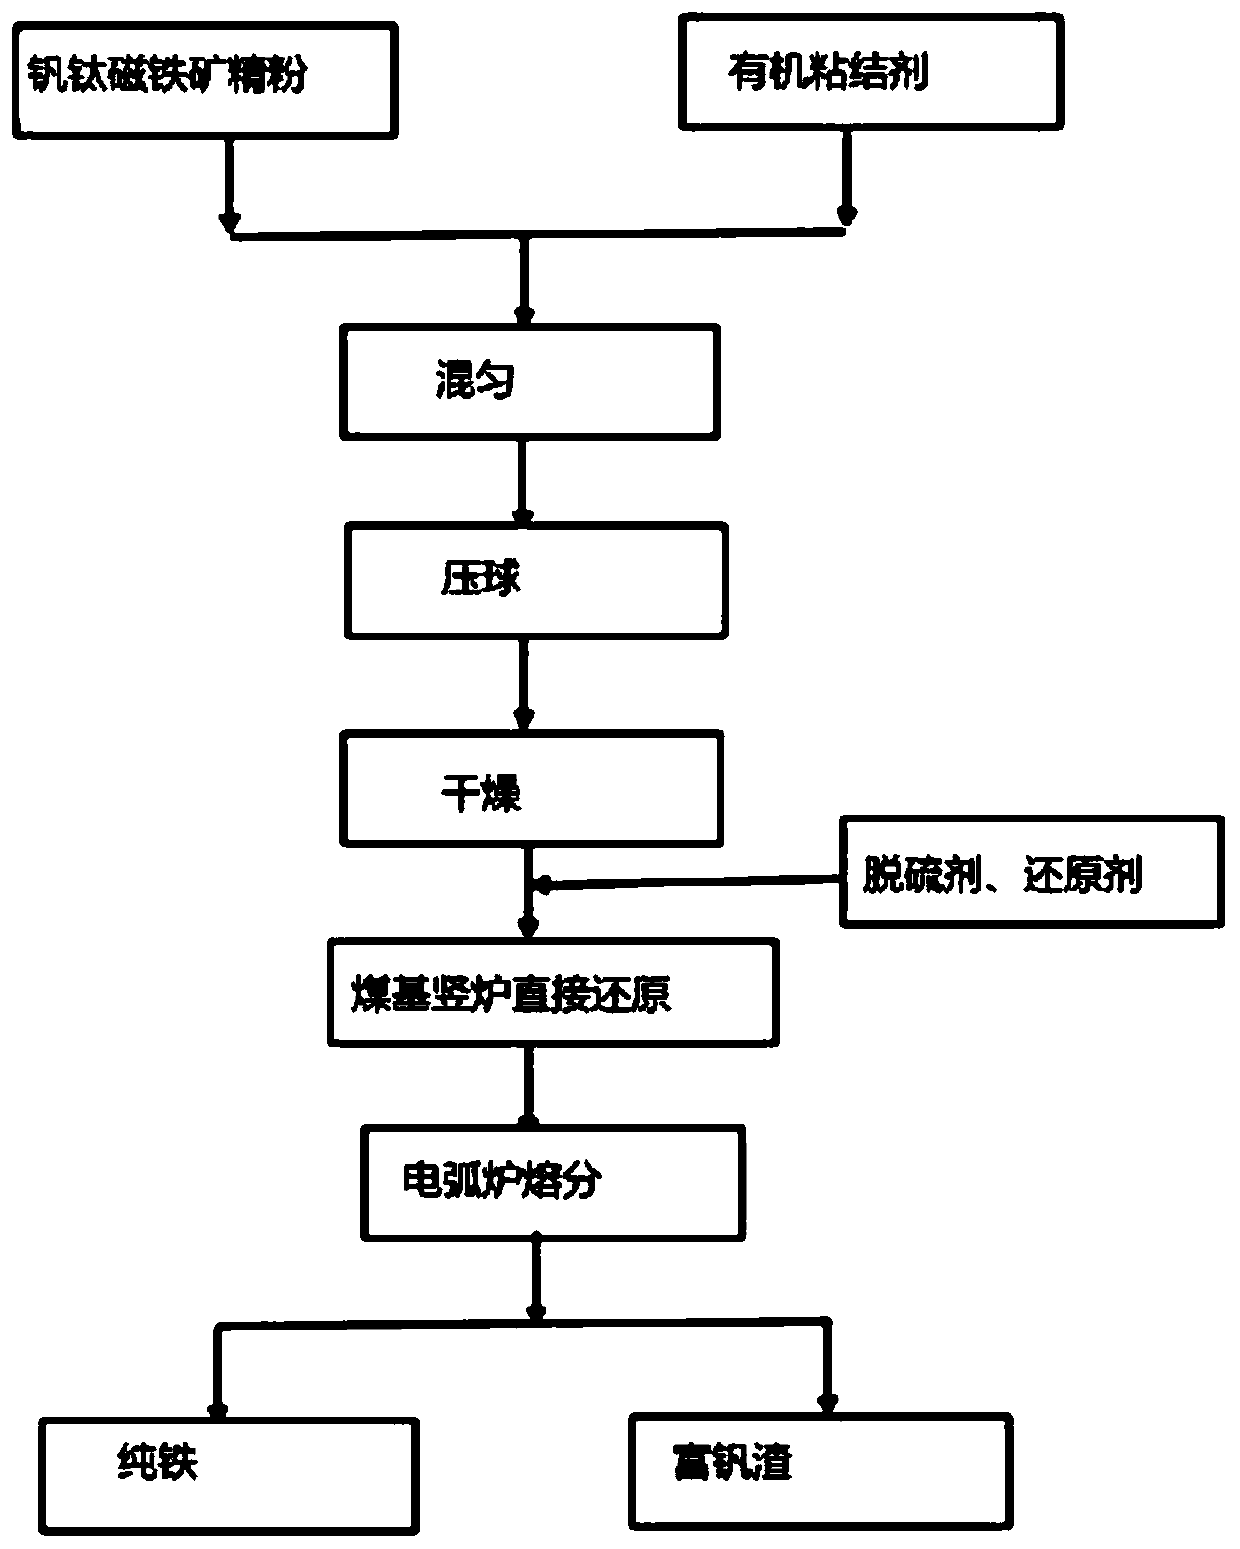 Smelting system for separating and enriching vanadium and producing pure iron from iron ore concentrate